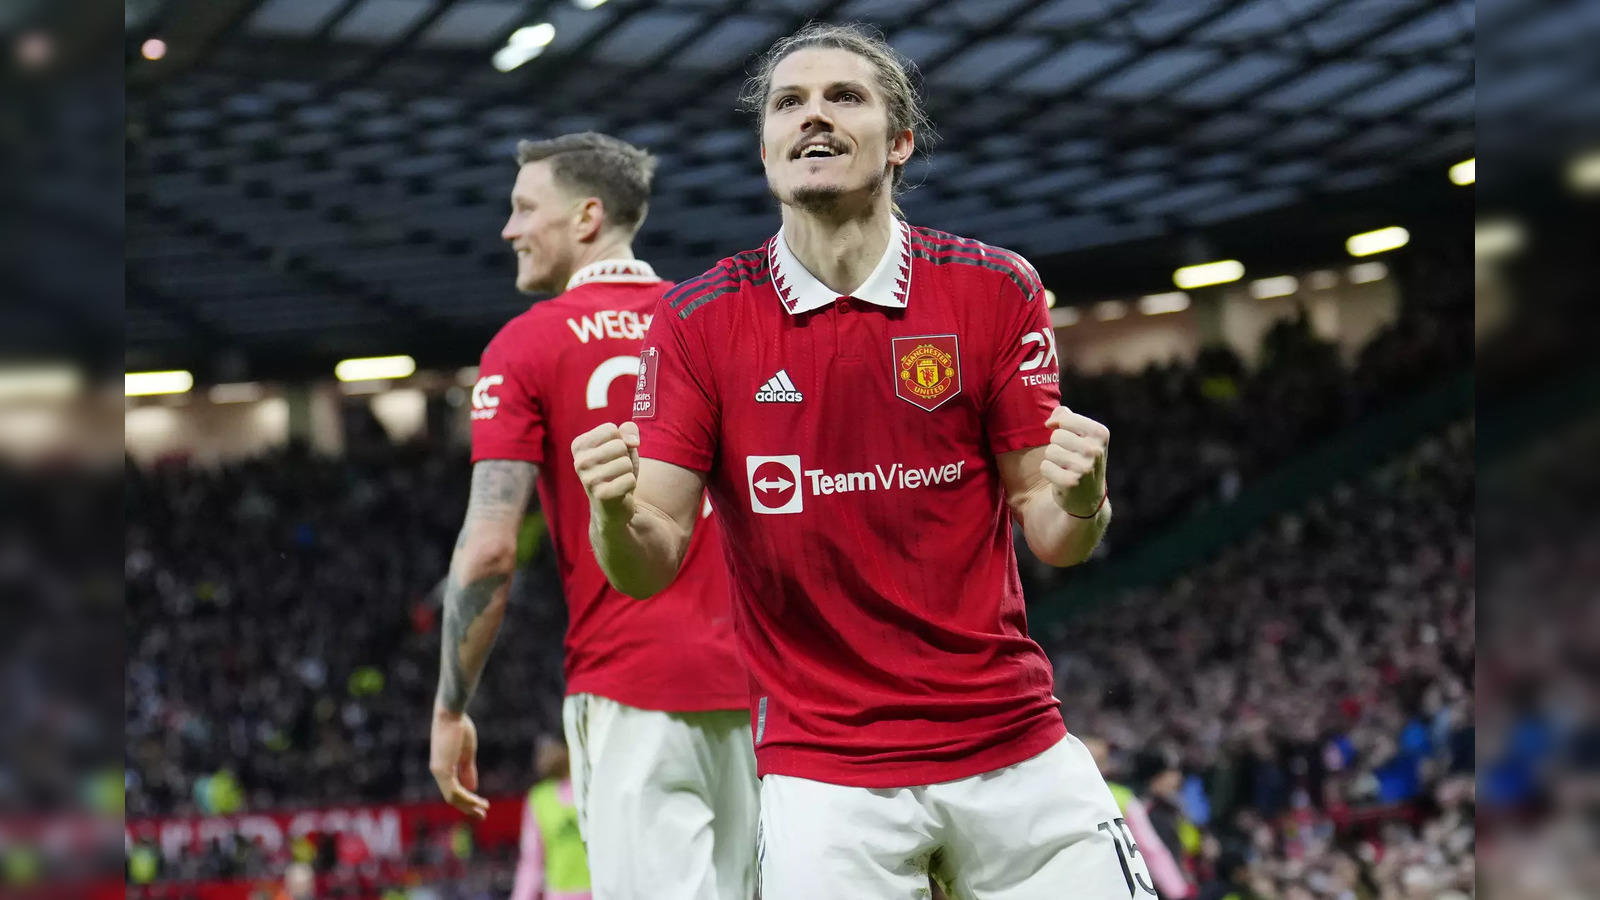 Manchester United vs Wrexham live streaming Kick-off date, time, how to watch on Man Utd match on TV